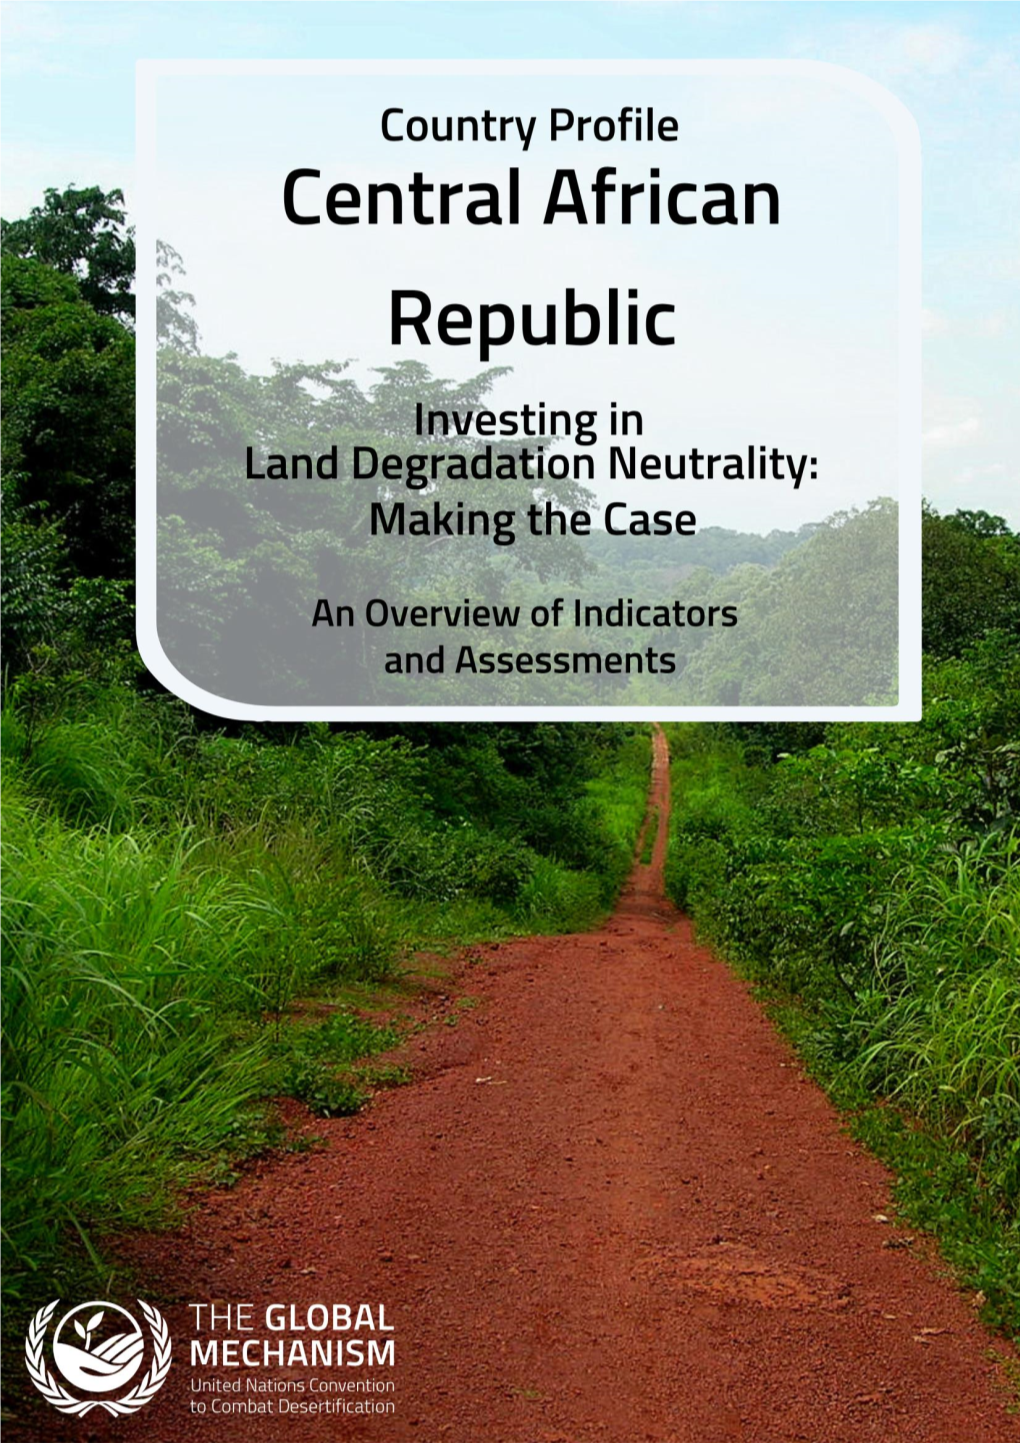 Central African Republic Investing in Land Degradation Neutrality